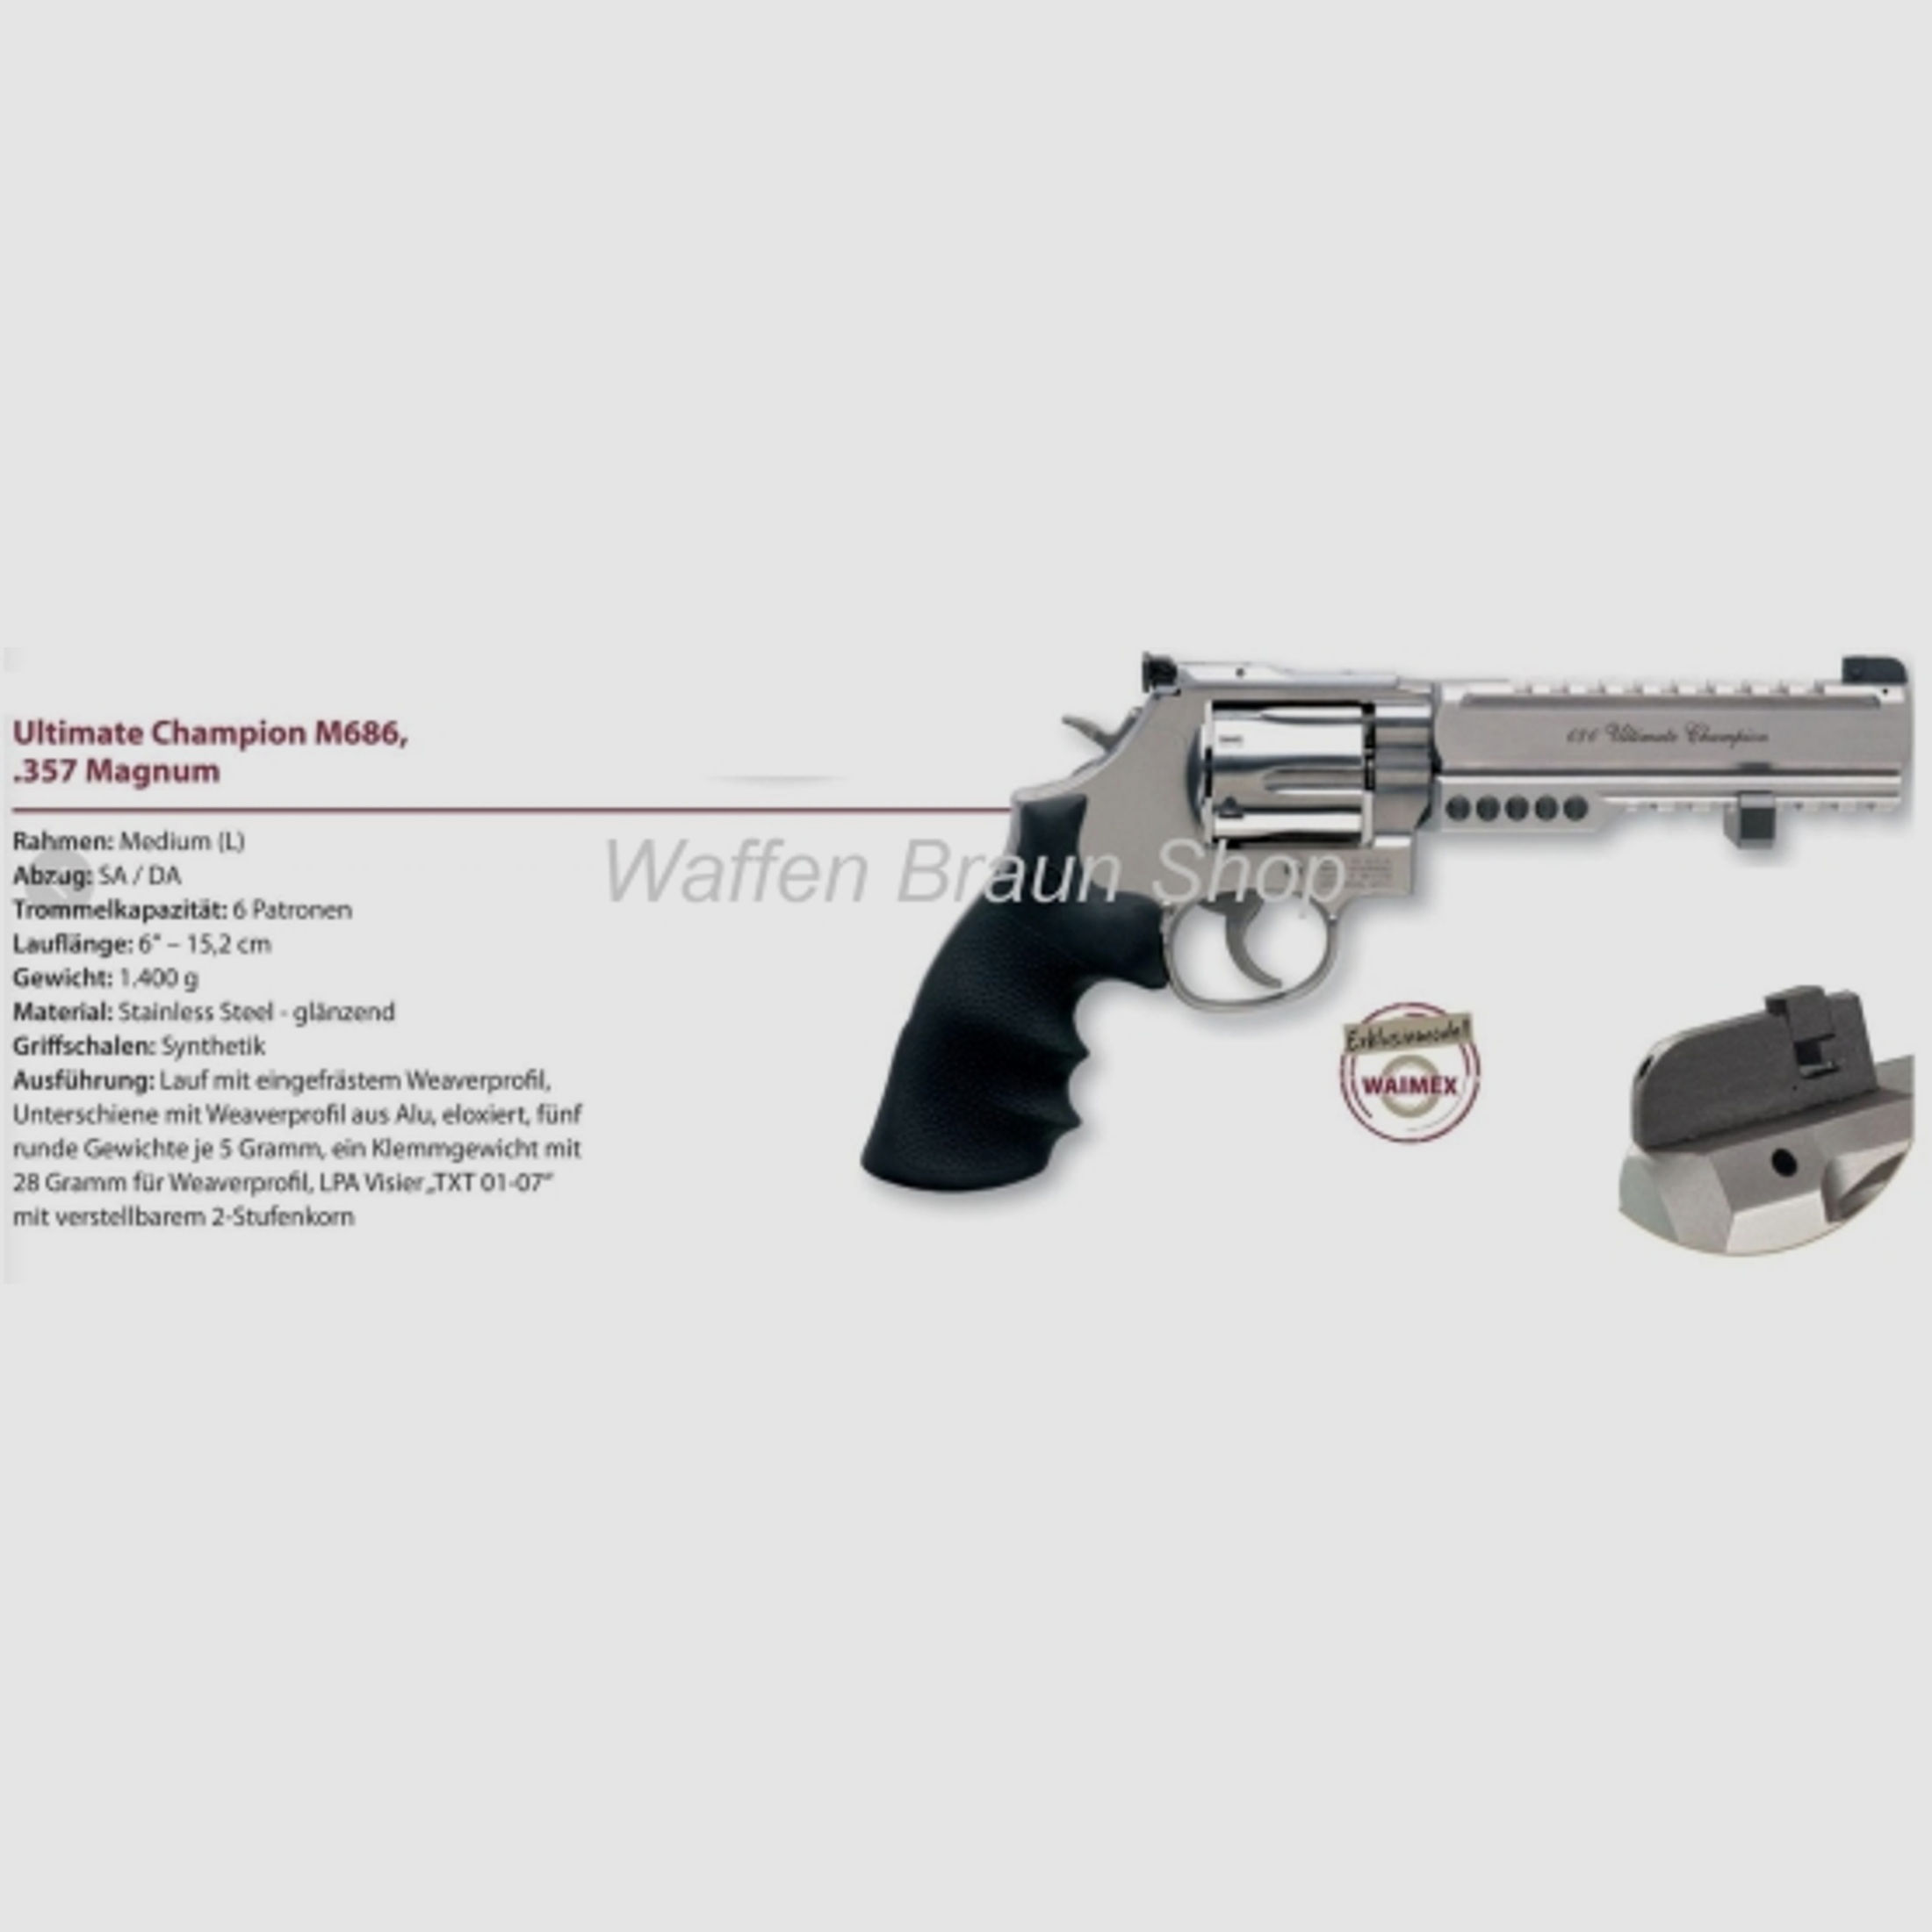 Smith & Wesson Mod 686 Ultimate Champion .357 Mag 6 " stainless